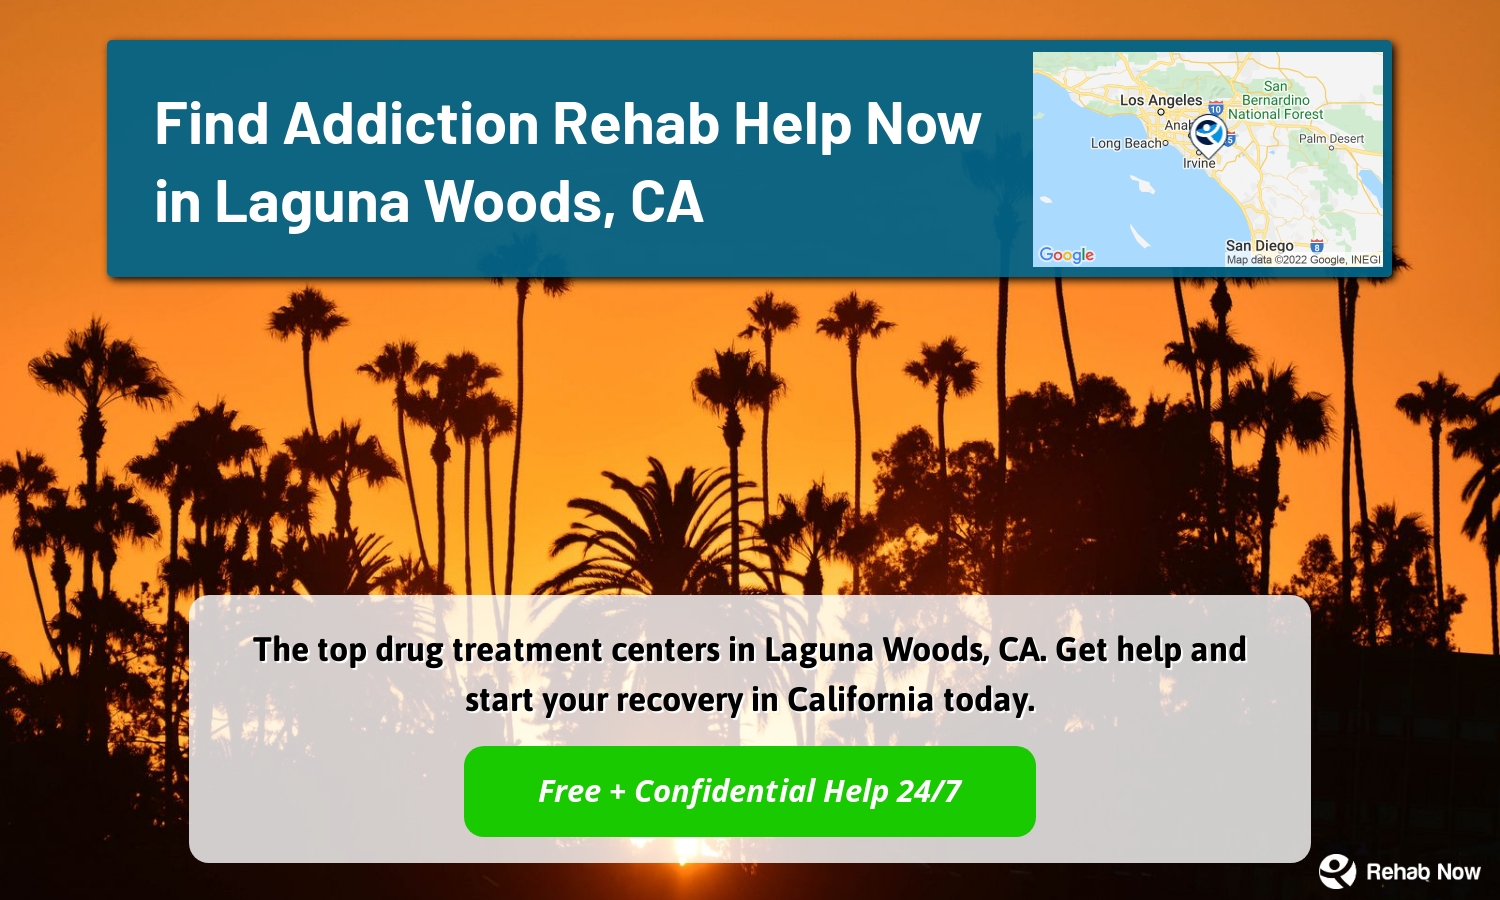 The top drug treatment centers in Laguna Woods, CA. Get help and start your recovery in California today.